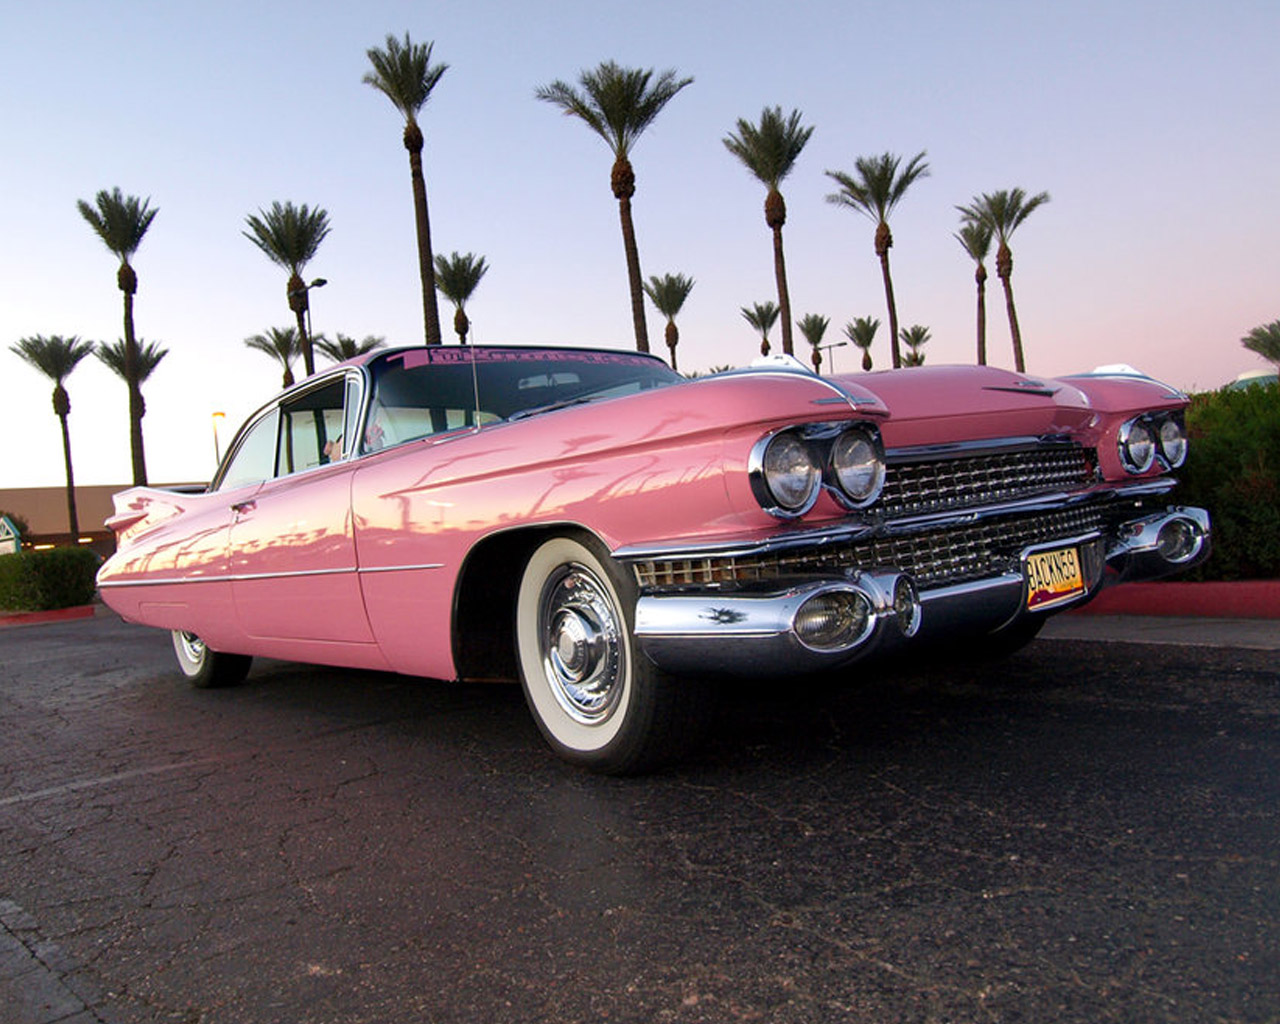 Pink Cadillac Pics, Movie Collection. 